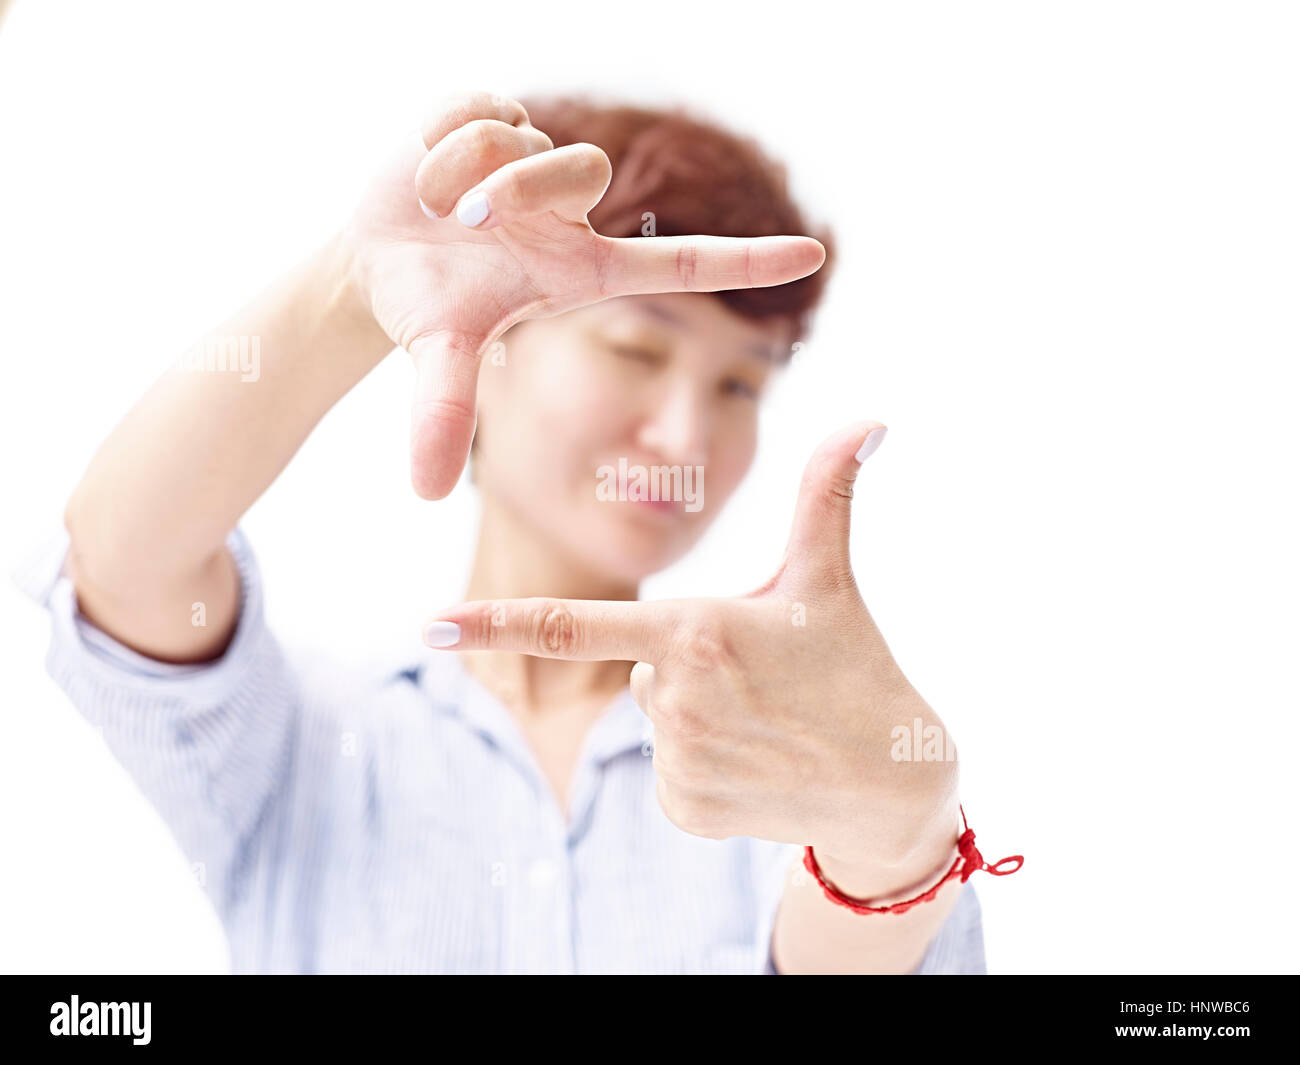 asian woman framing a picture with hands, isolated on white background. Stock Photo